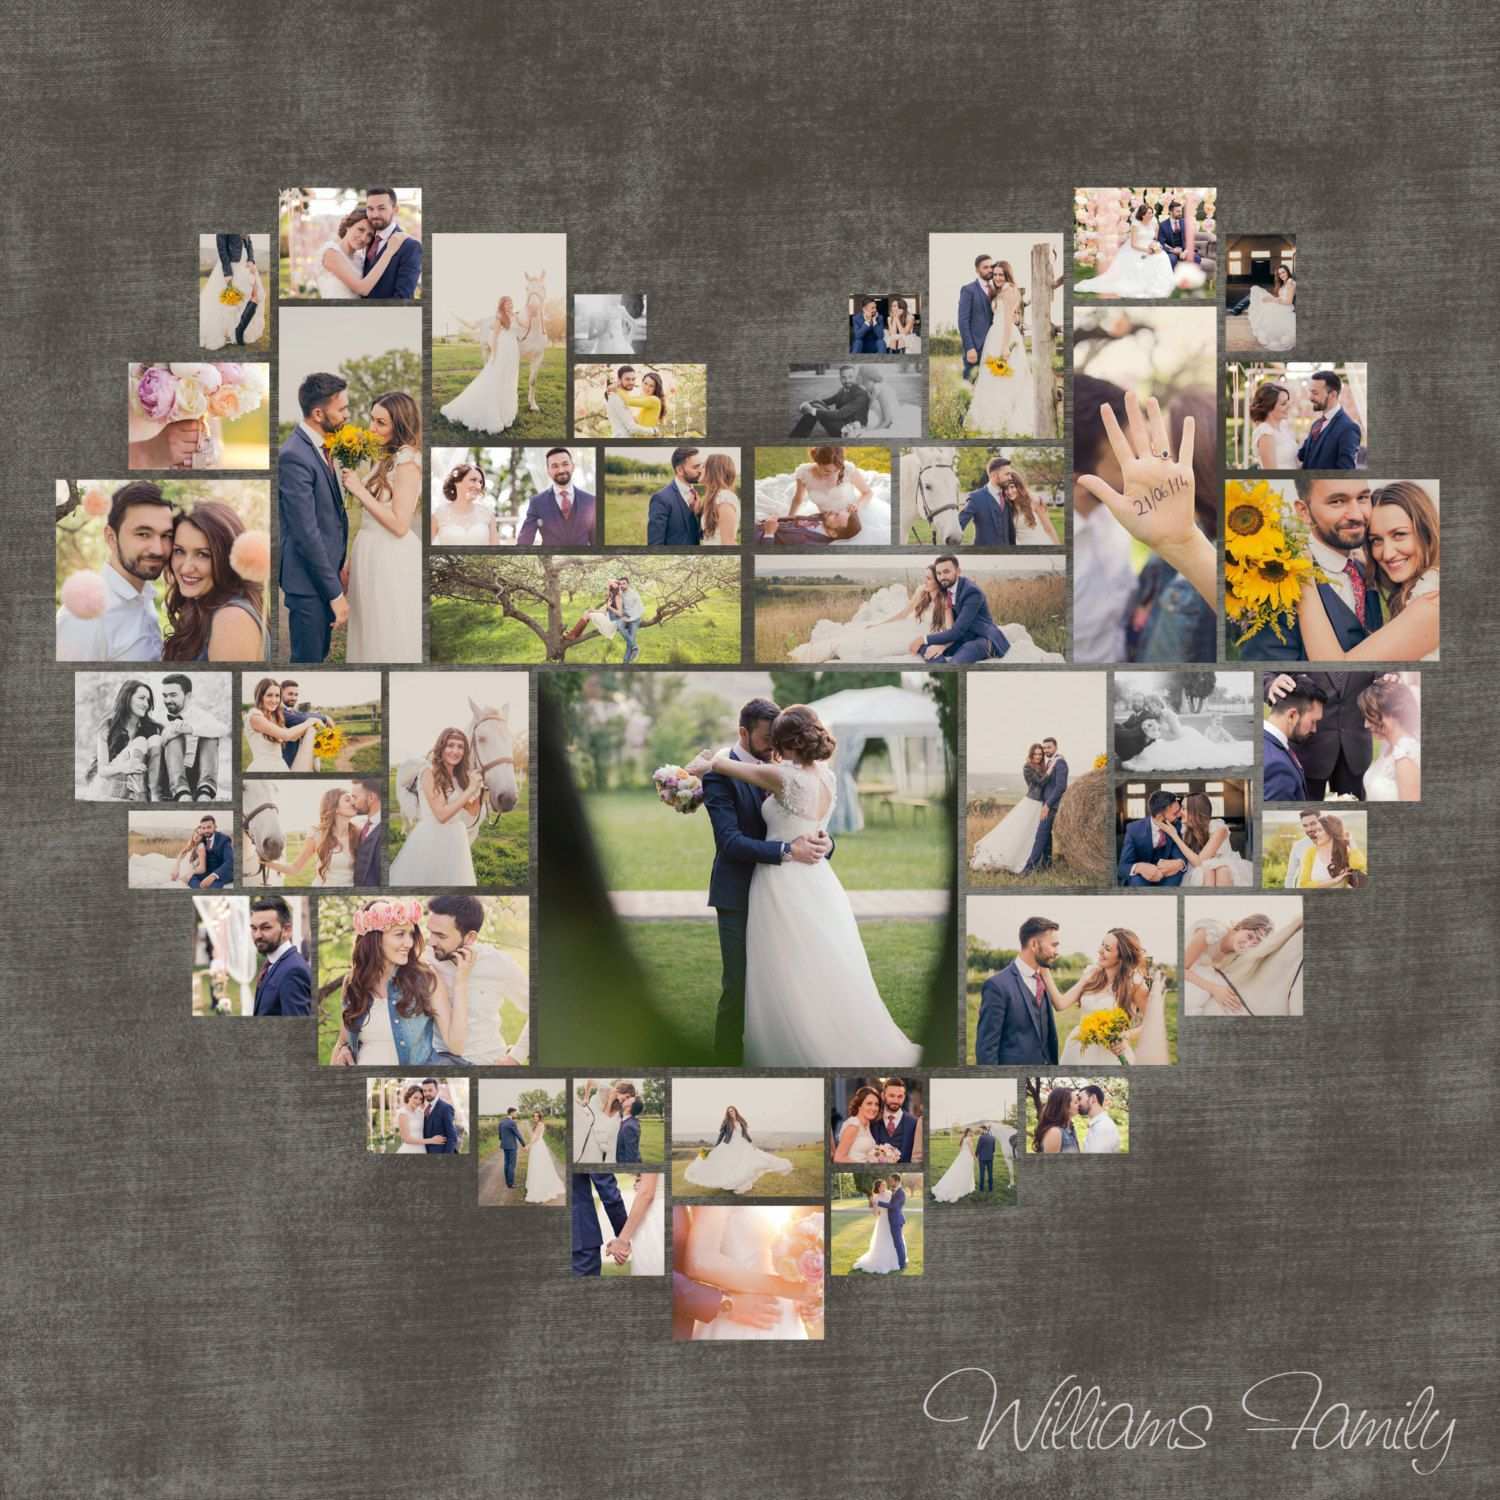 Heart Photo Collage Template Psd Wedding Gift Anniversary Etsy Heart Photo Collage Photo Heart Photo Collage Template